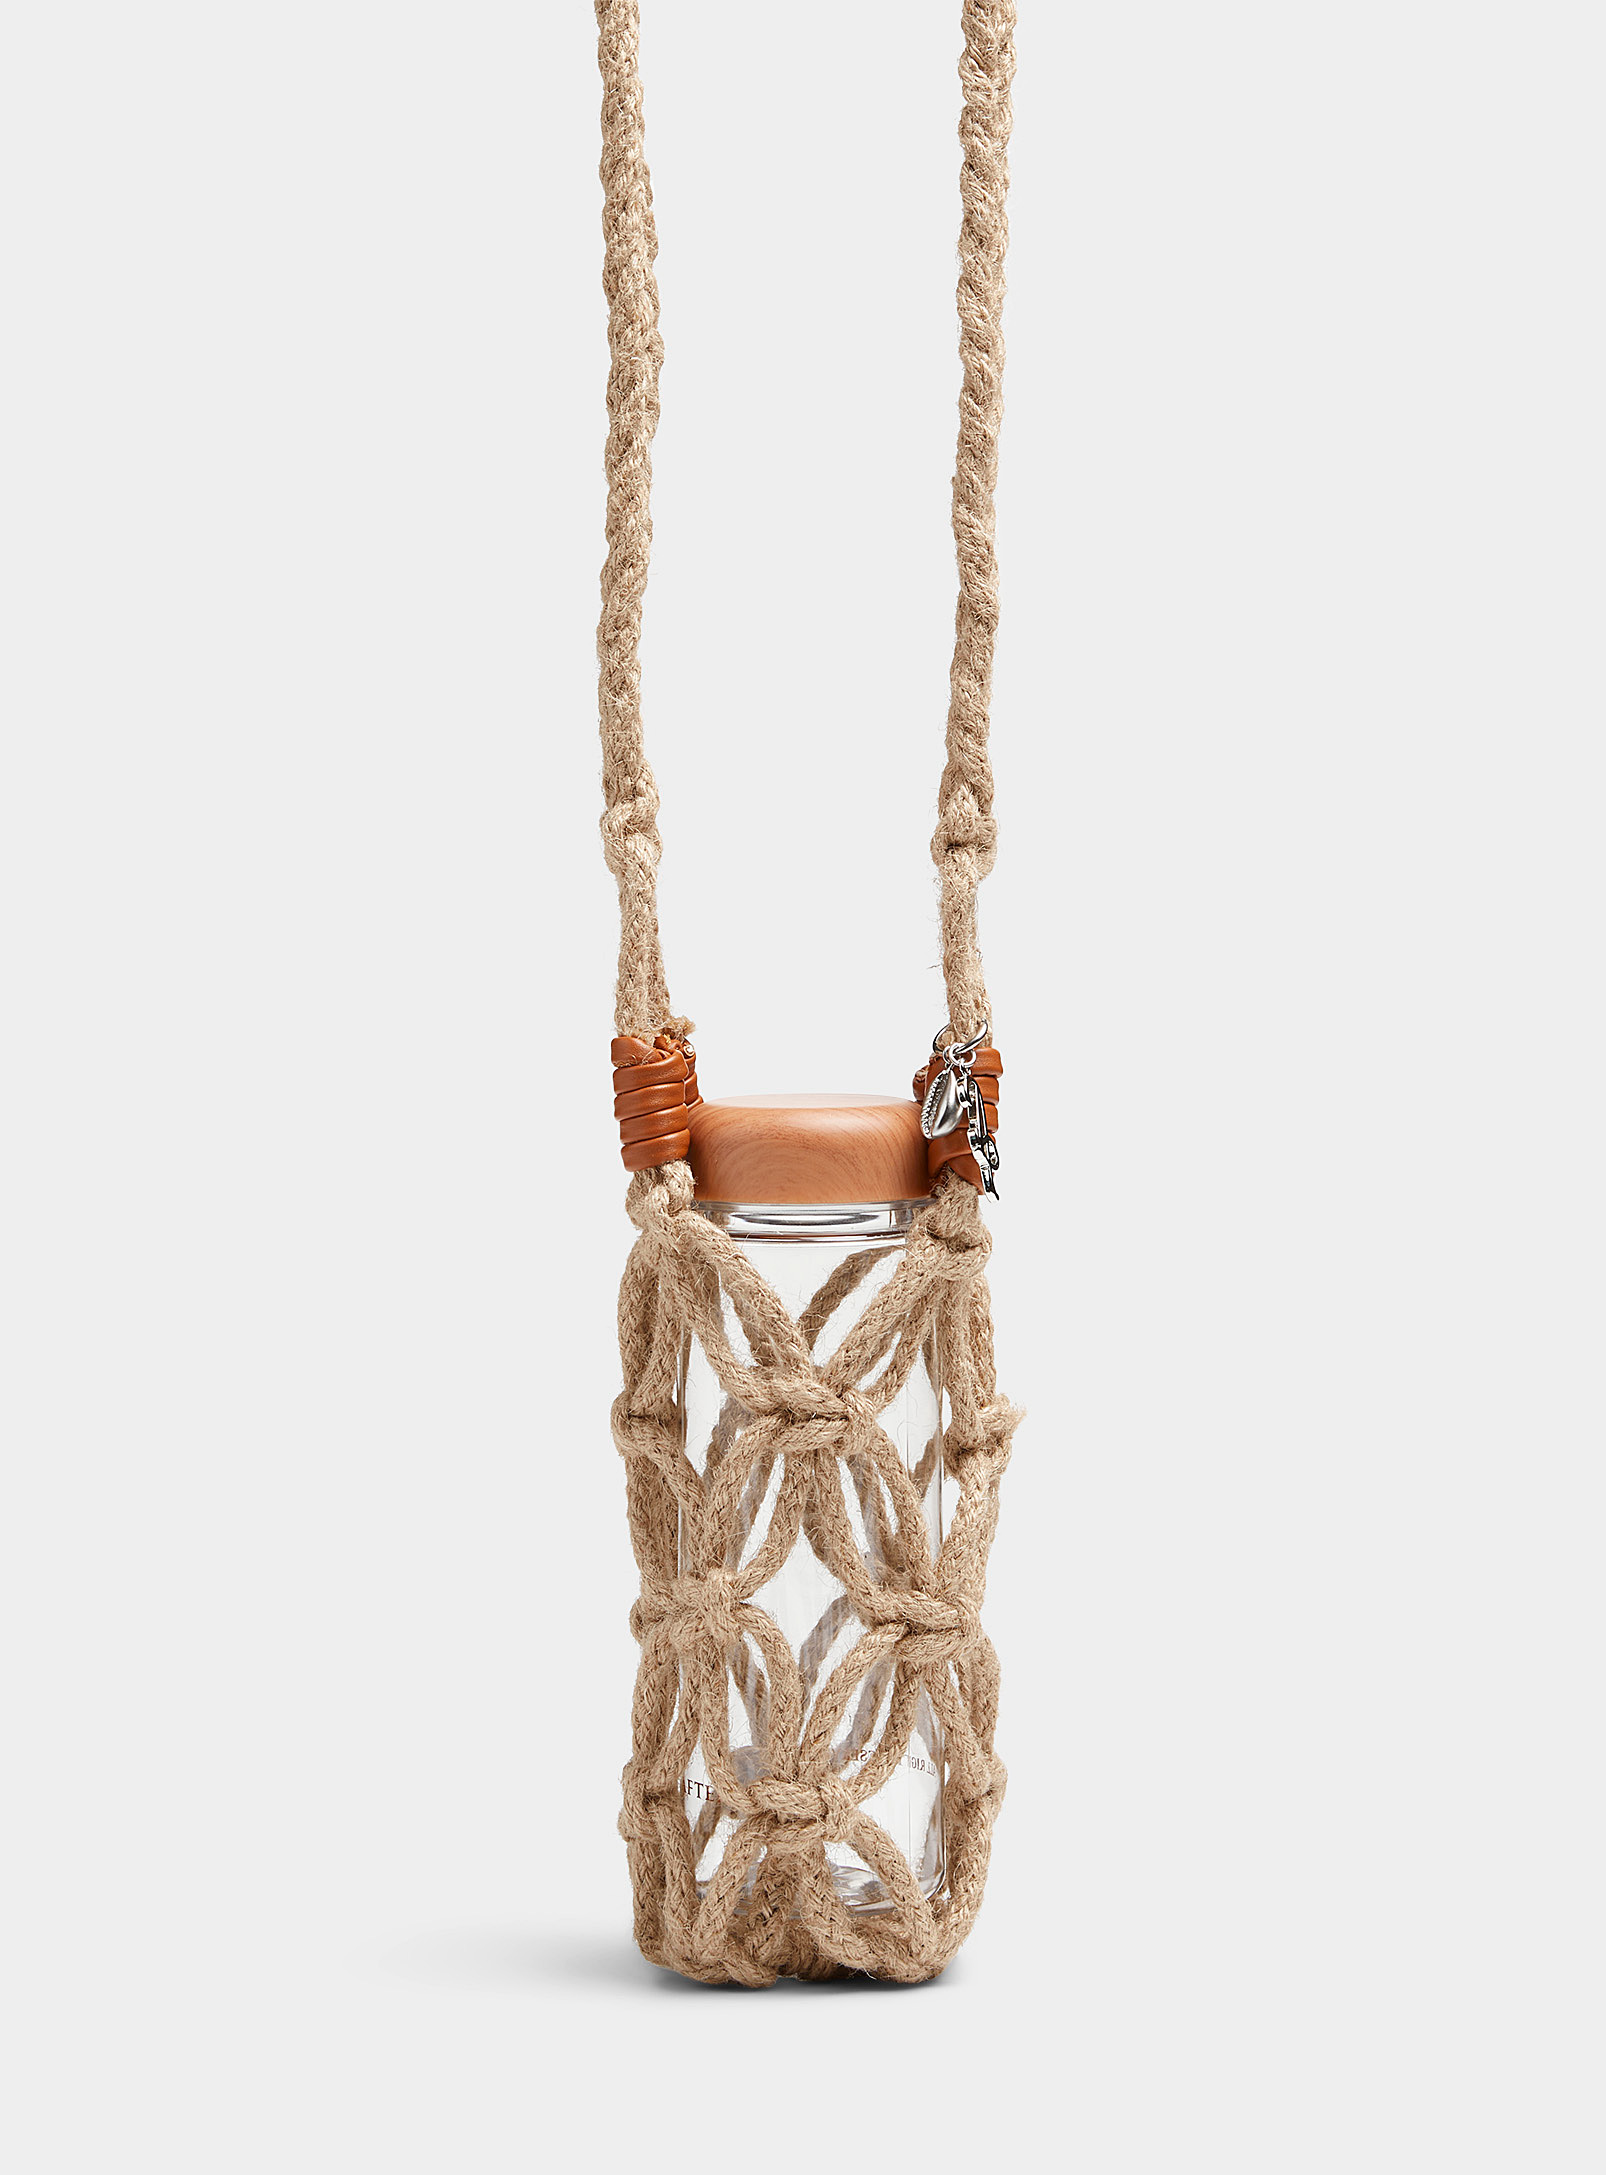 After Pray Bottle Braided Cord Bag In Patterned Ecru